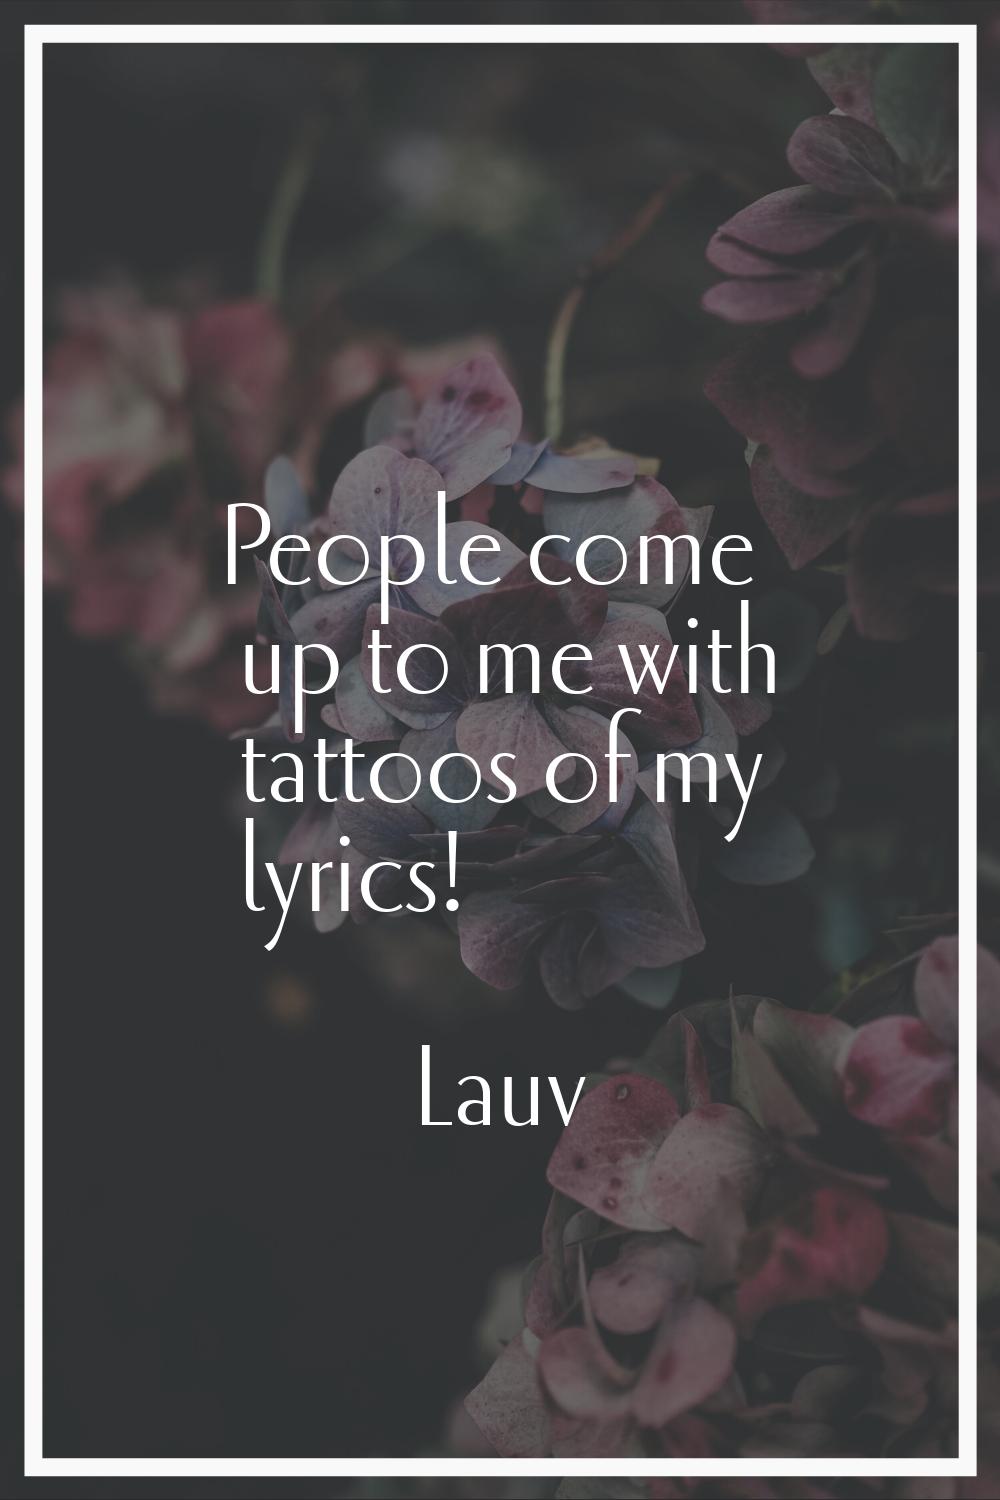 People come up to me with tattoos of my lyrics!